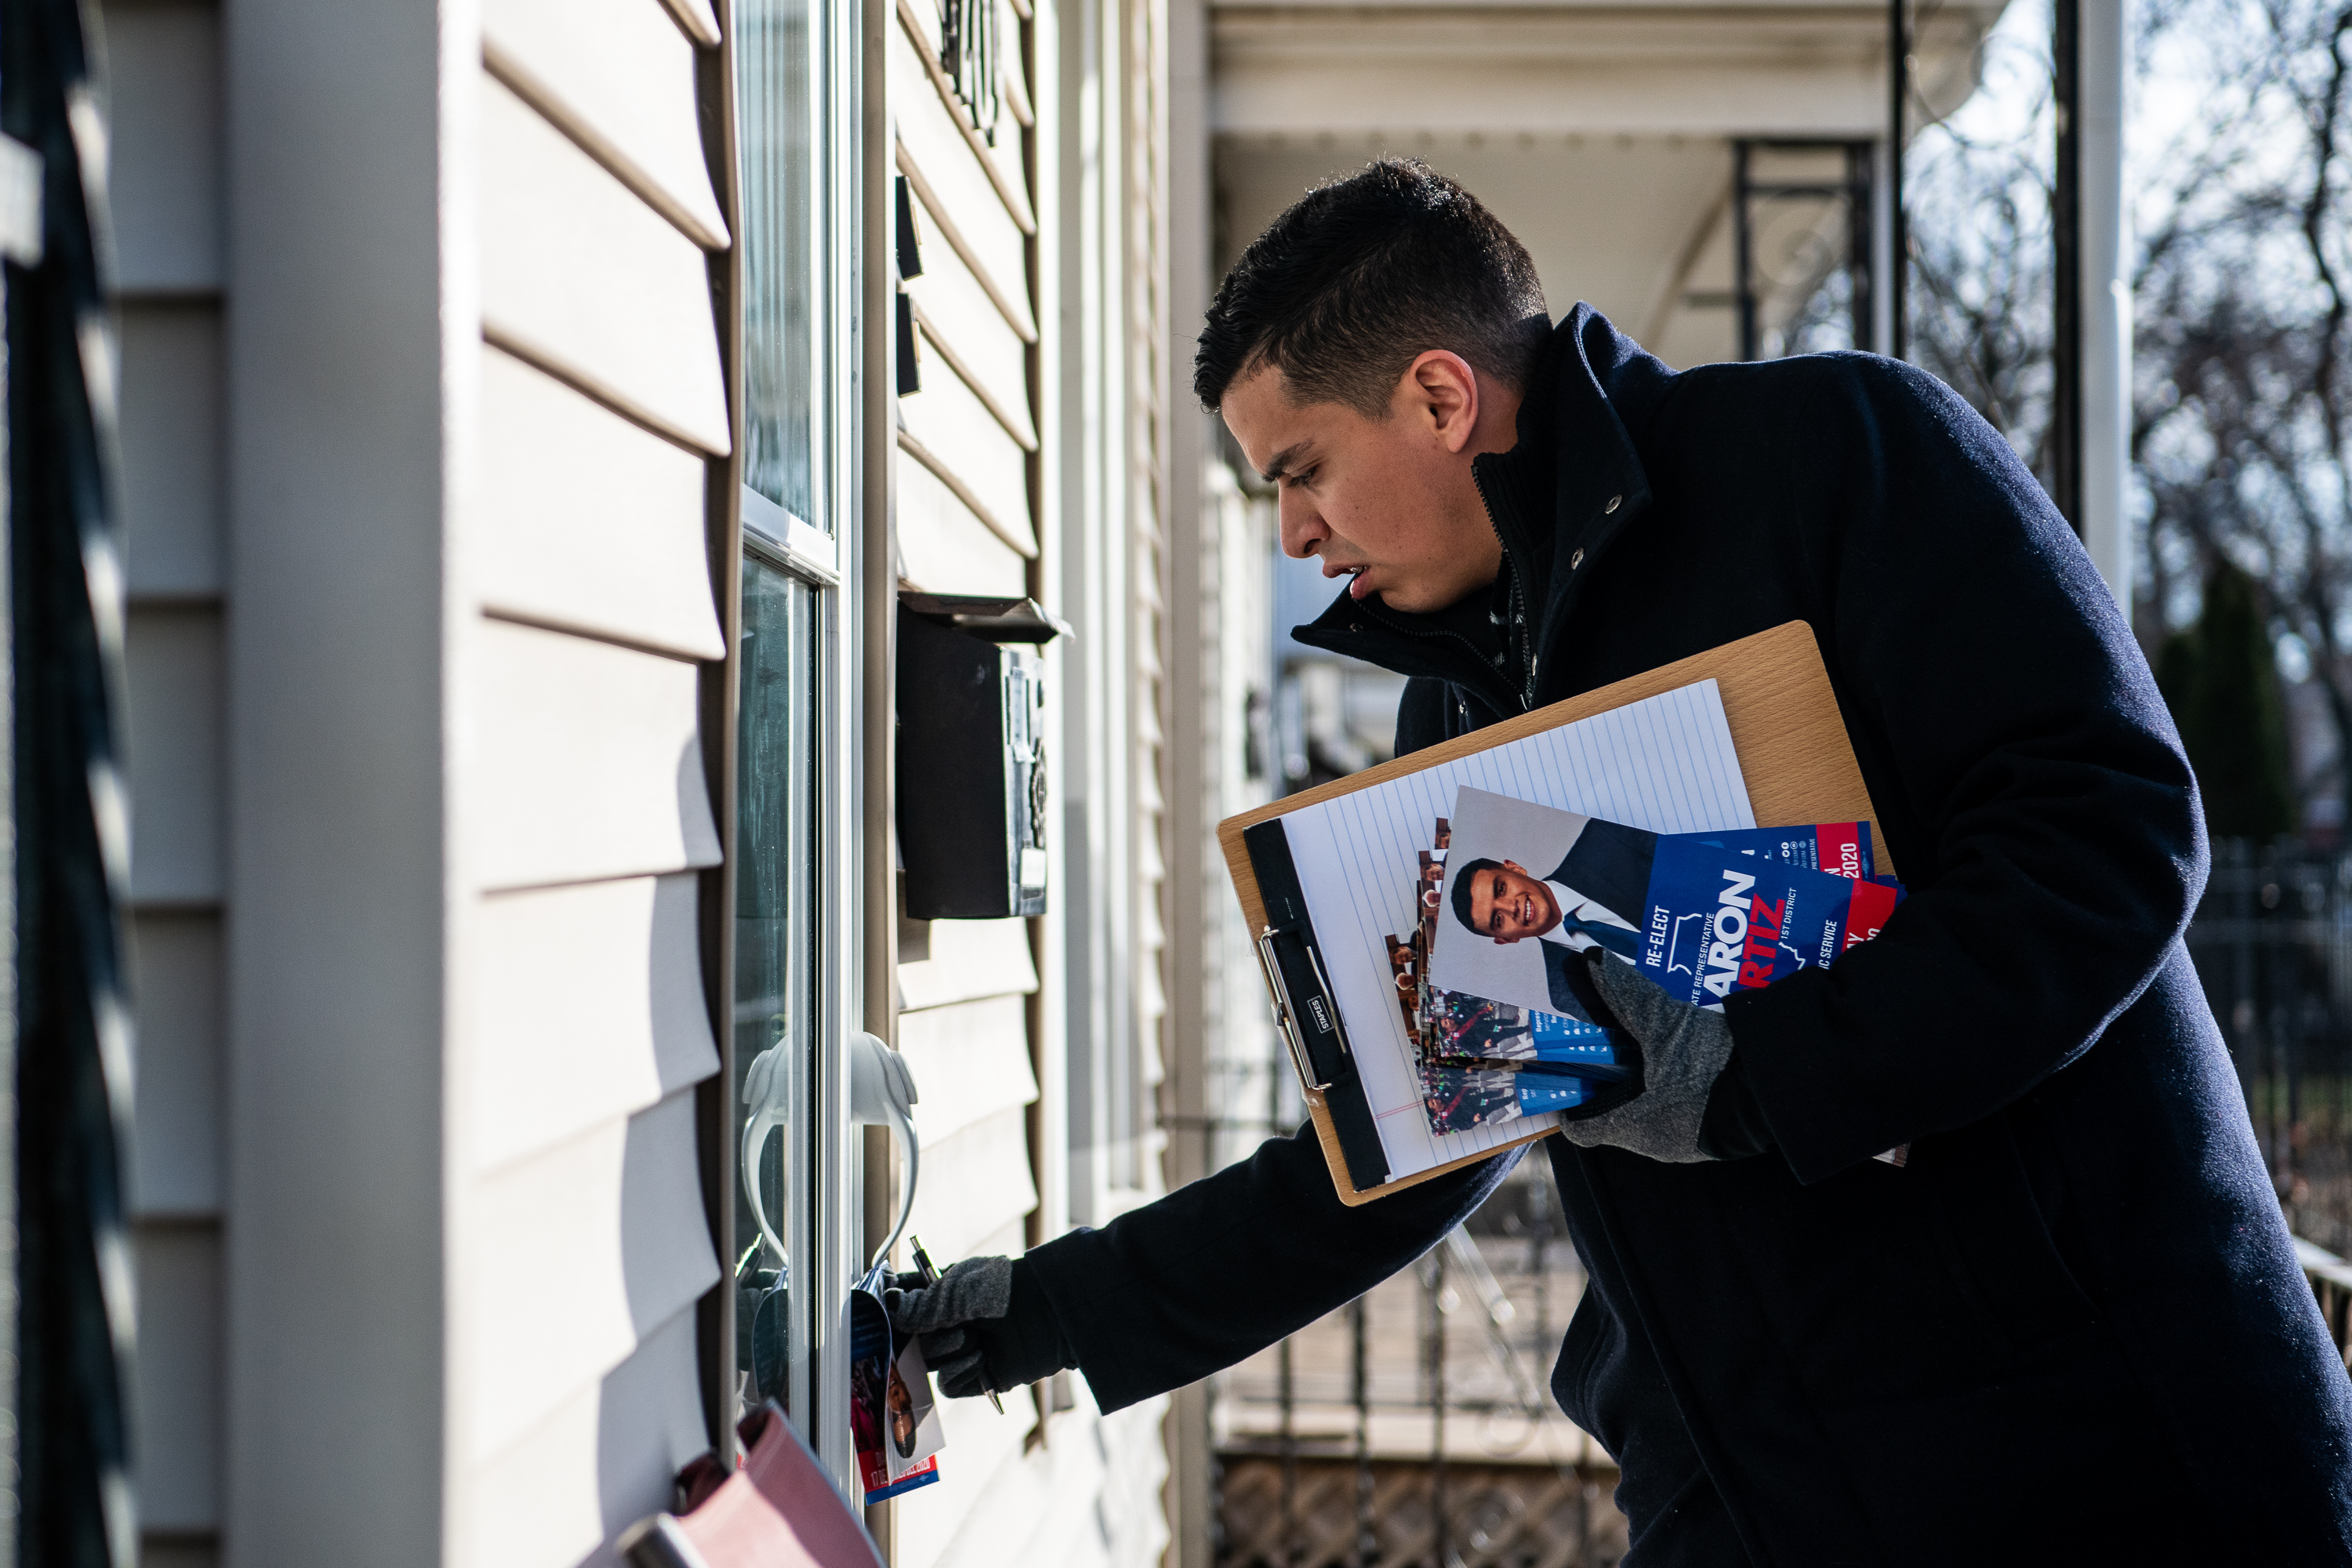 Illinois Representative Aaron Ortiz leaves a campaign flyer between the door and the frame at a home in Chicago’s 14th Ward during his canvas of the 14th Ward for his election campaign for the 14th Ward Committeeperson during December 2019.